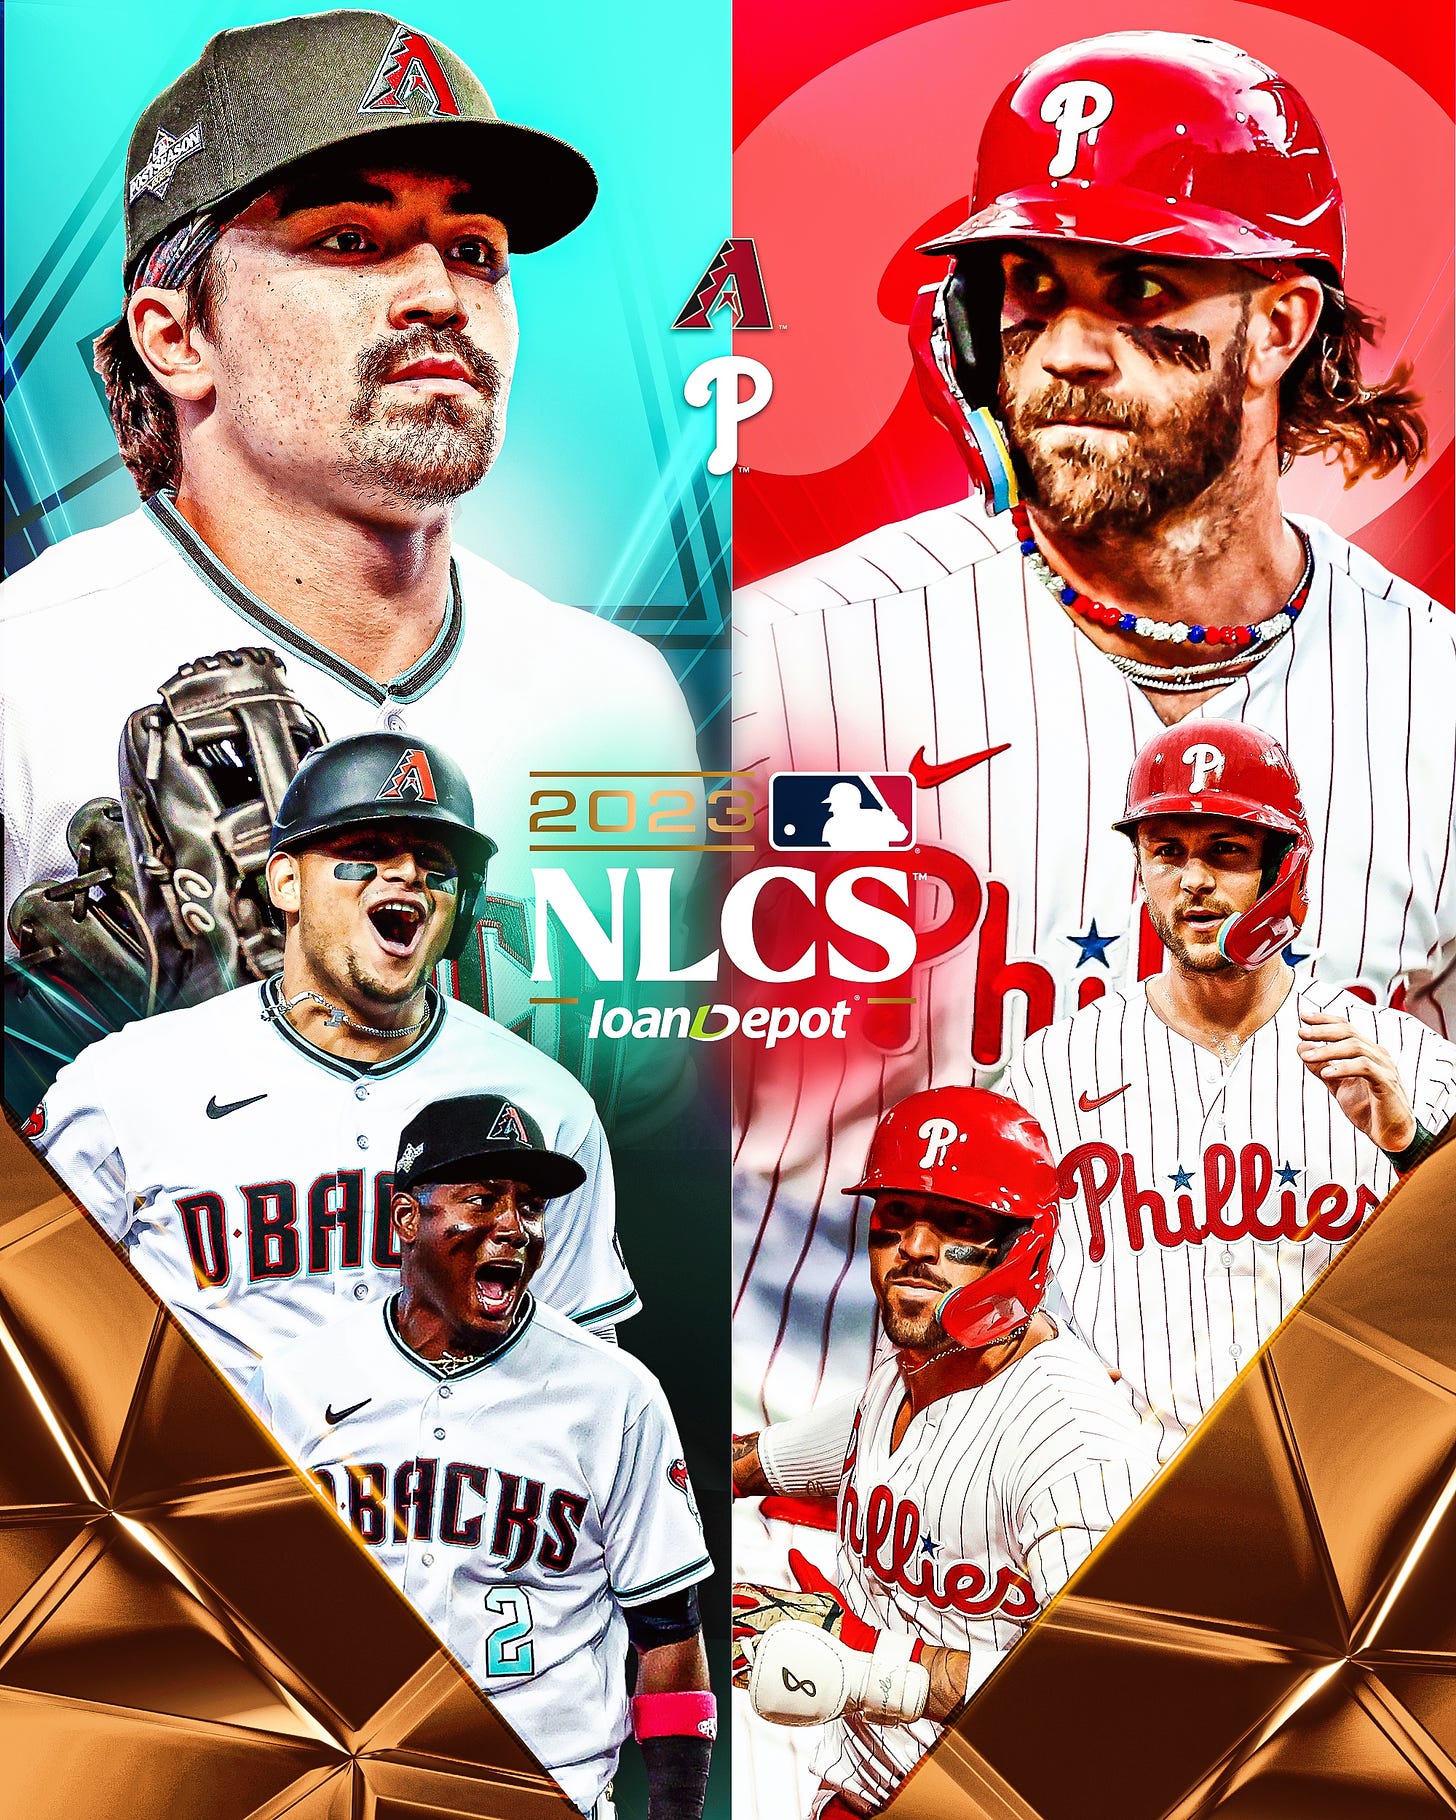 MLB on X: "Different paths, same end goal. The @Dbacks and @Phillies face  off in the #NLCS with a trip to the #WorldSeries on the line. 👀  https://t.co/Fzo4BbxZJO" / X